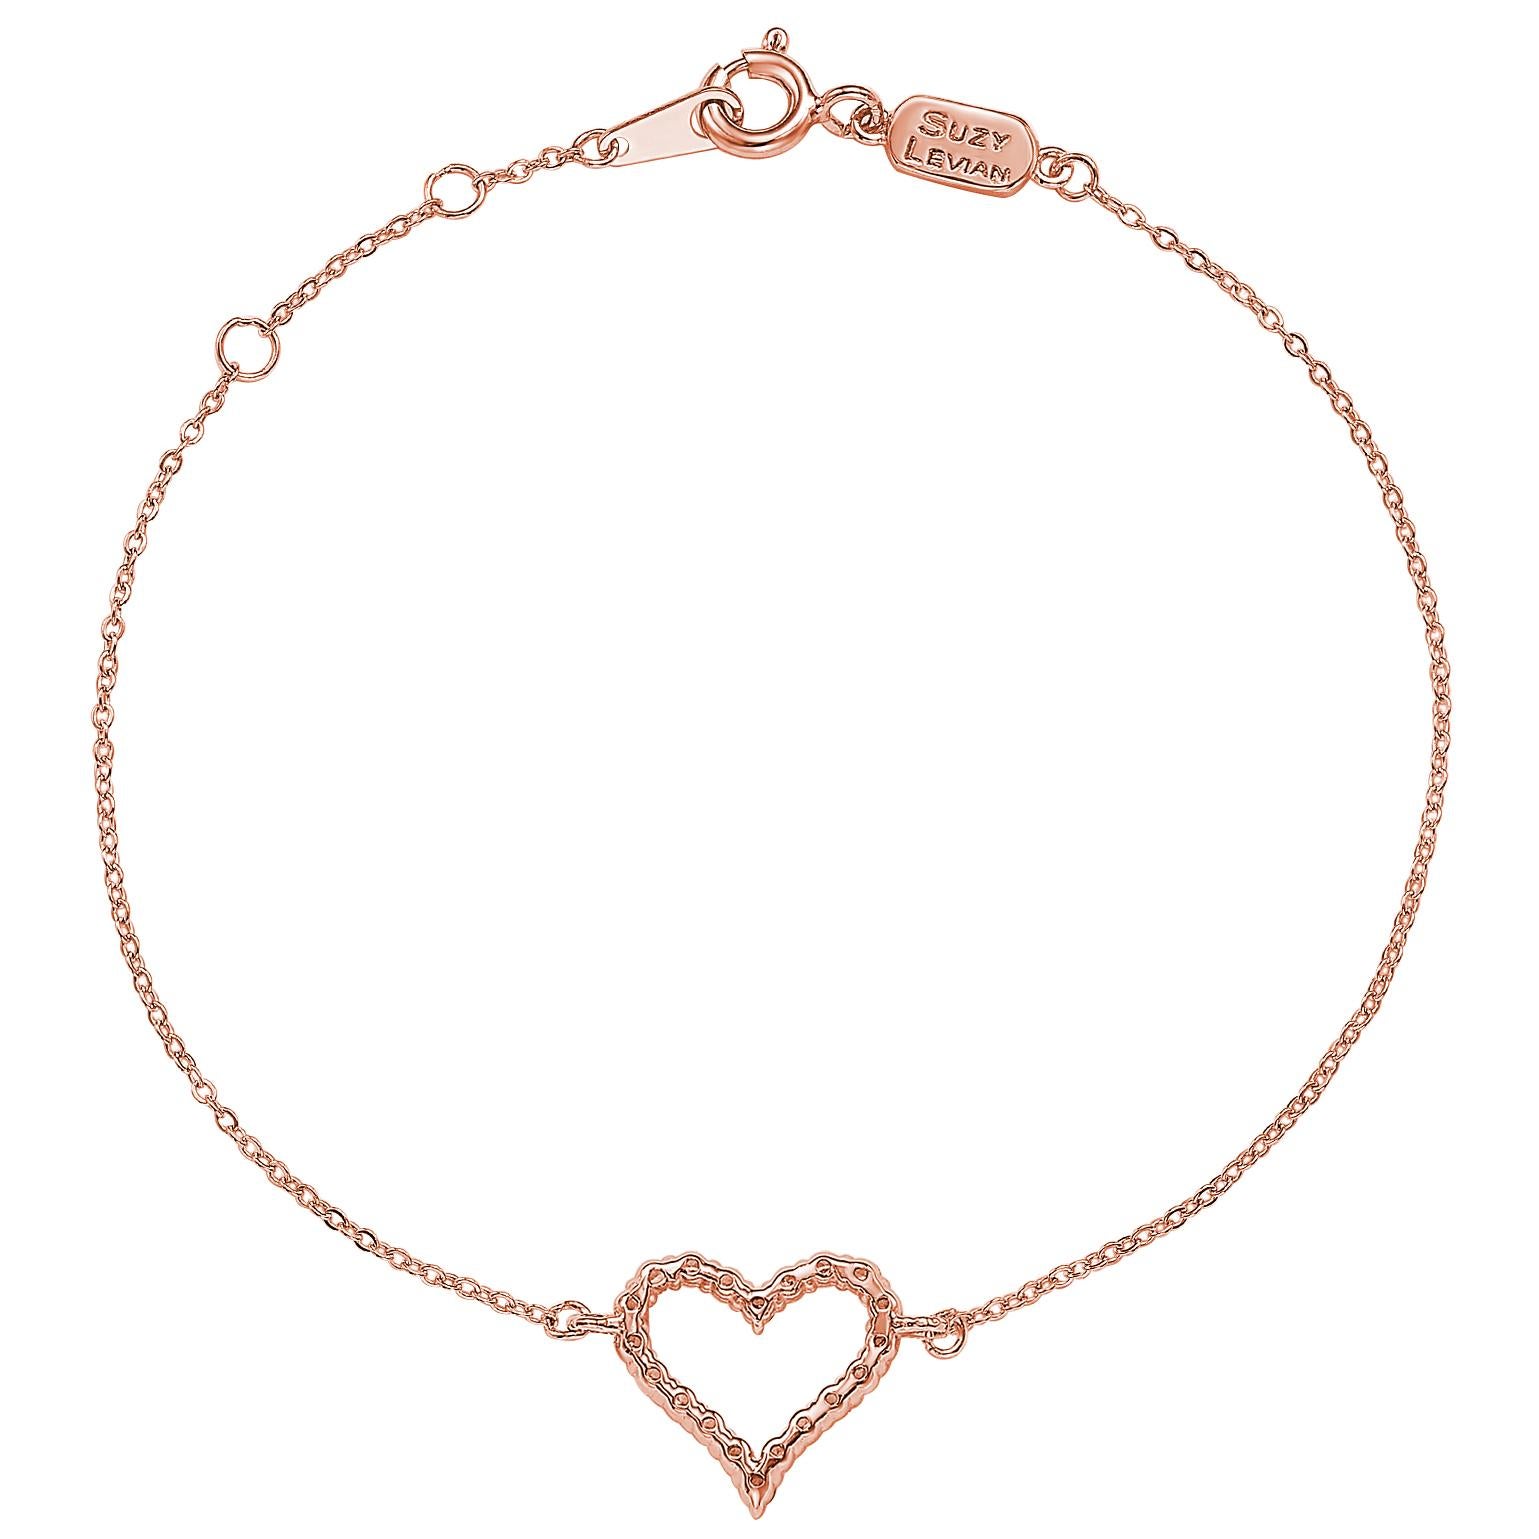 This elegant Suzy Levian heart solitaire bracelet features 19 diamonds, which are 1.4 mm size totals .24 cttw, all set in 14K rose gold setting. Each diamond heart is attached to a chain that is secured with a spring ring closure with a white gold